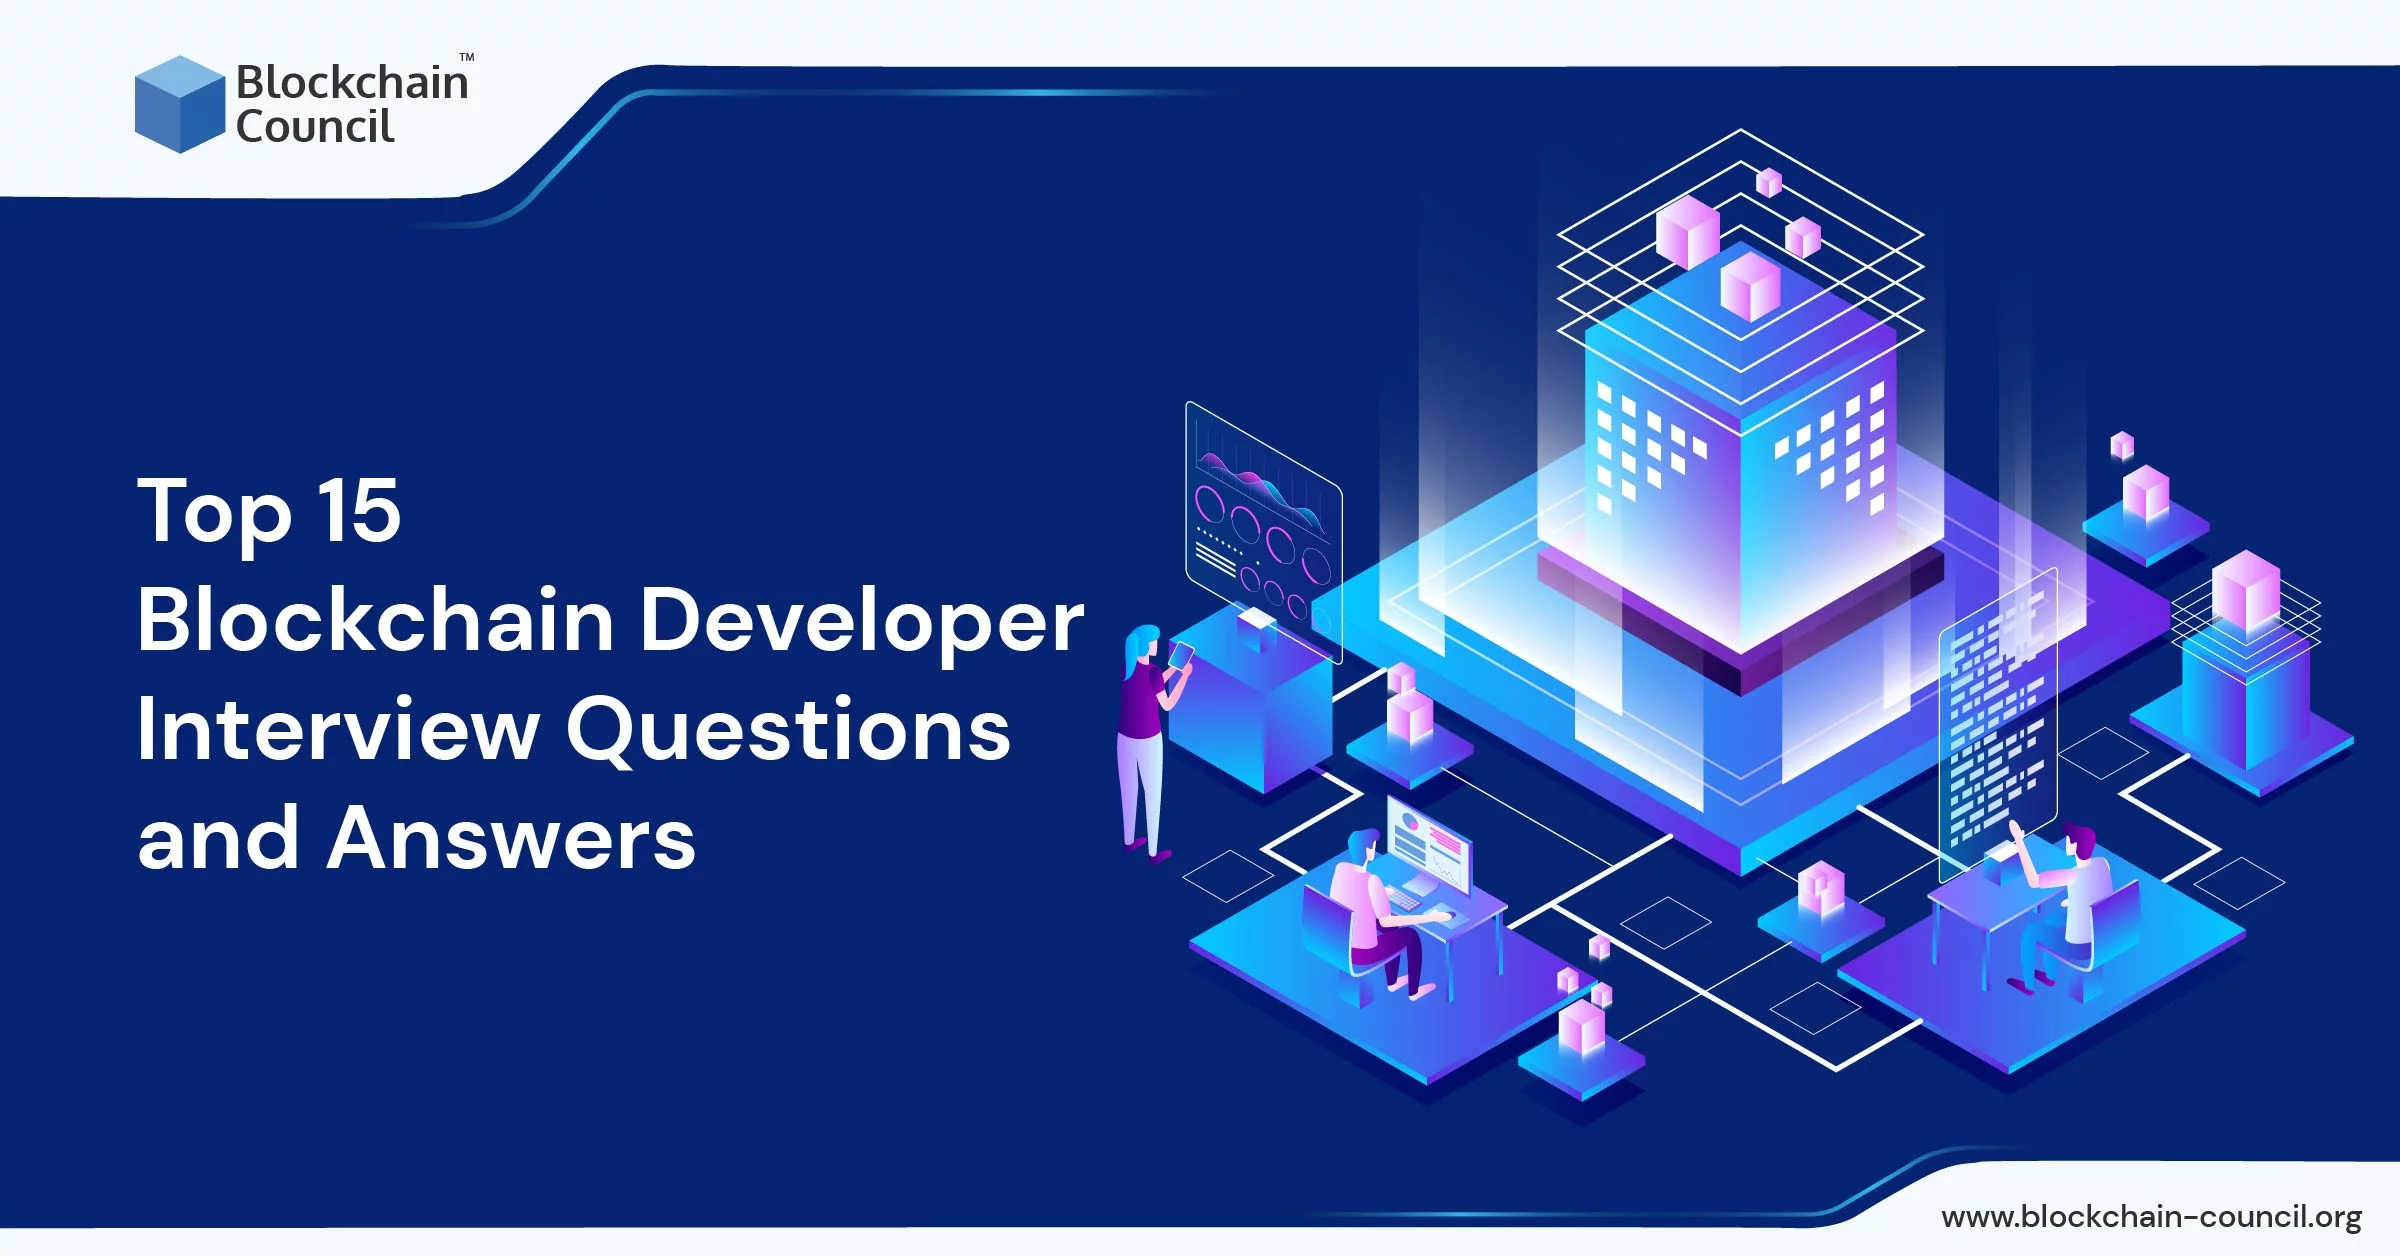 Top 15 Blockchain Developer Interview Questions and Answers